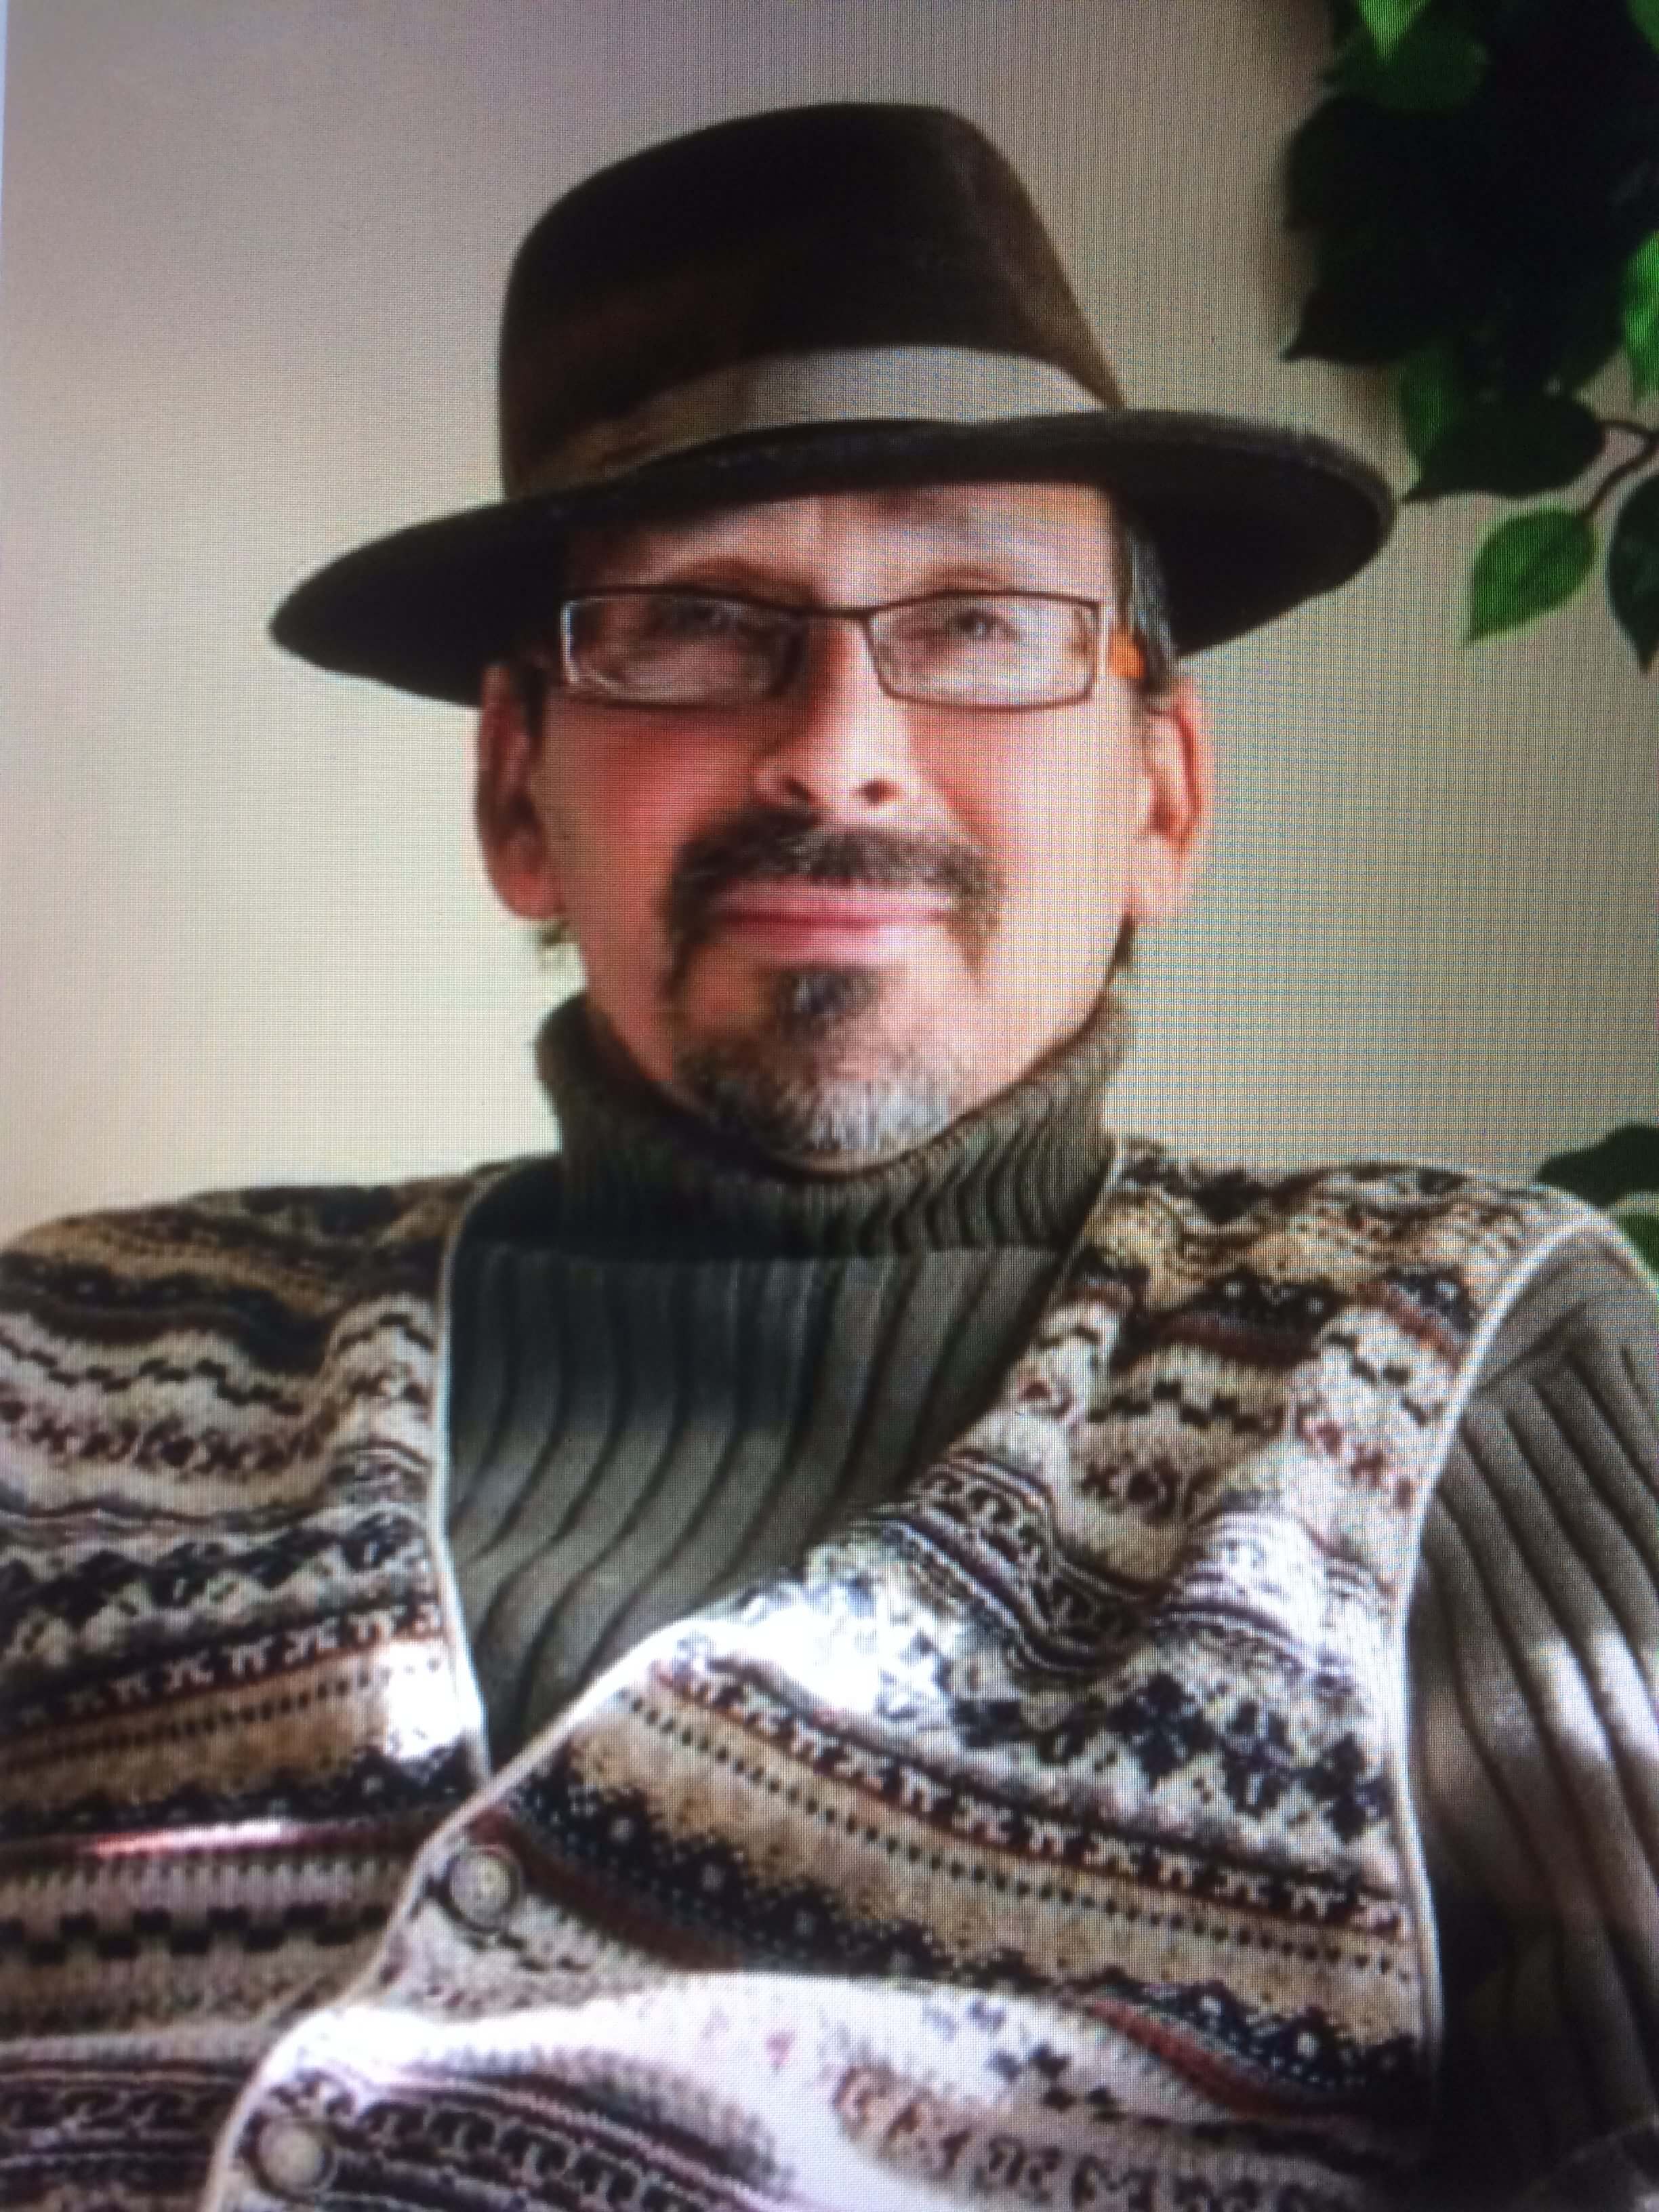 Photo of a man in a brown hat and sweater